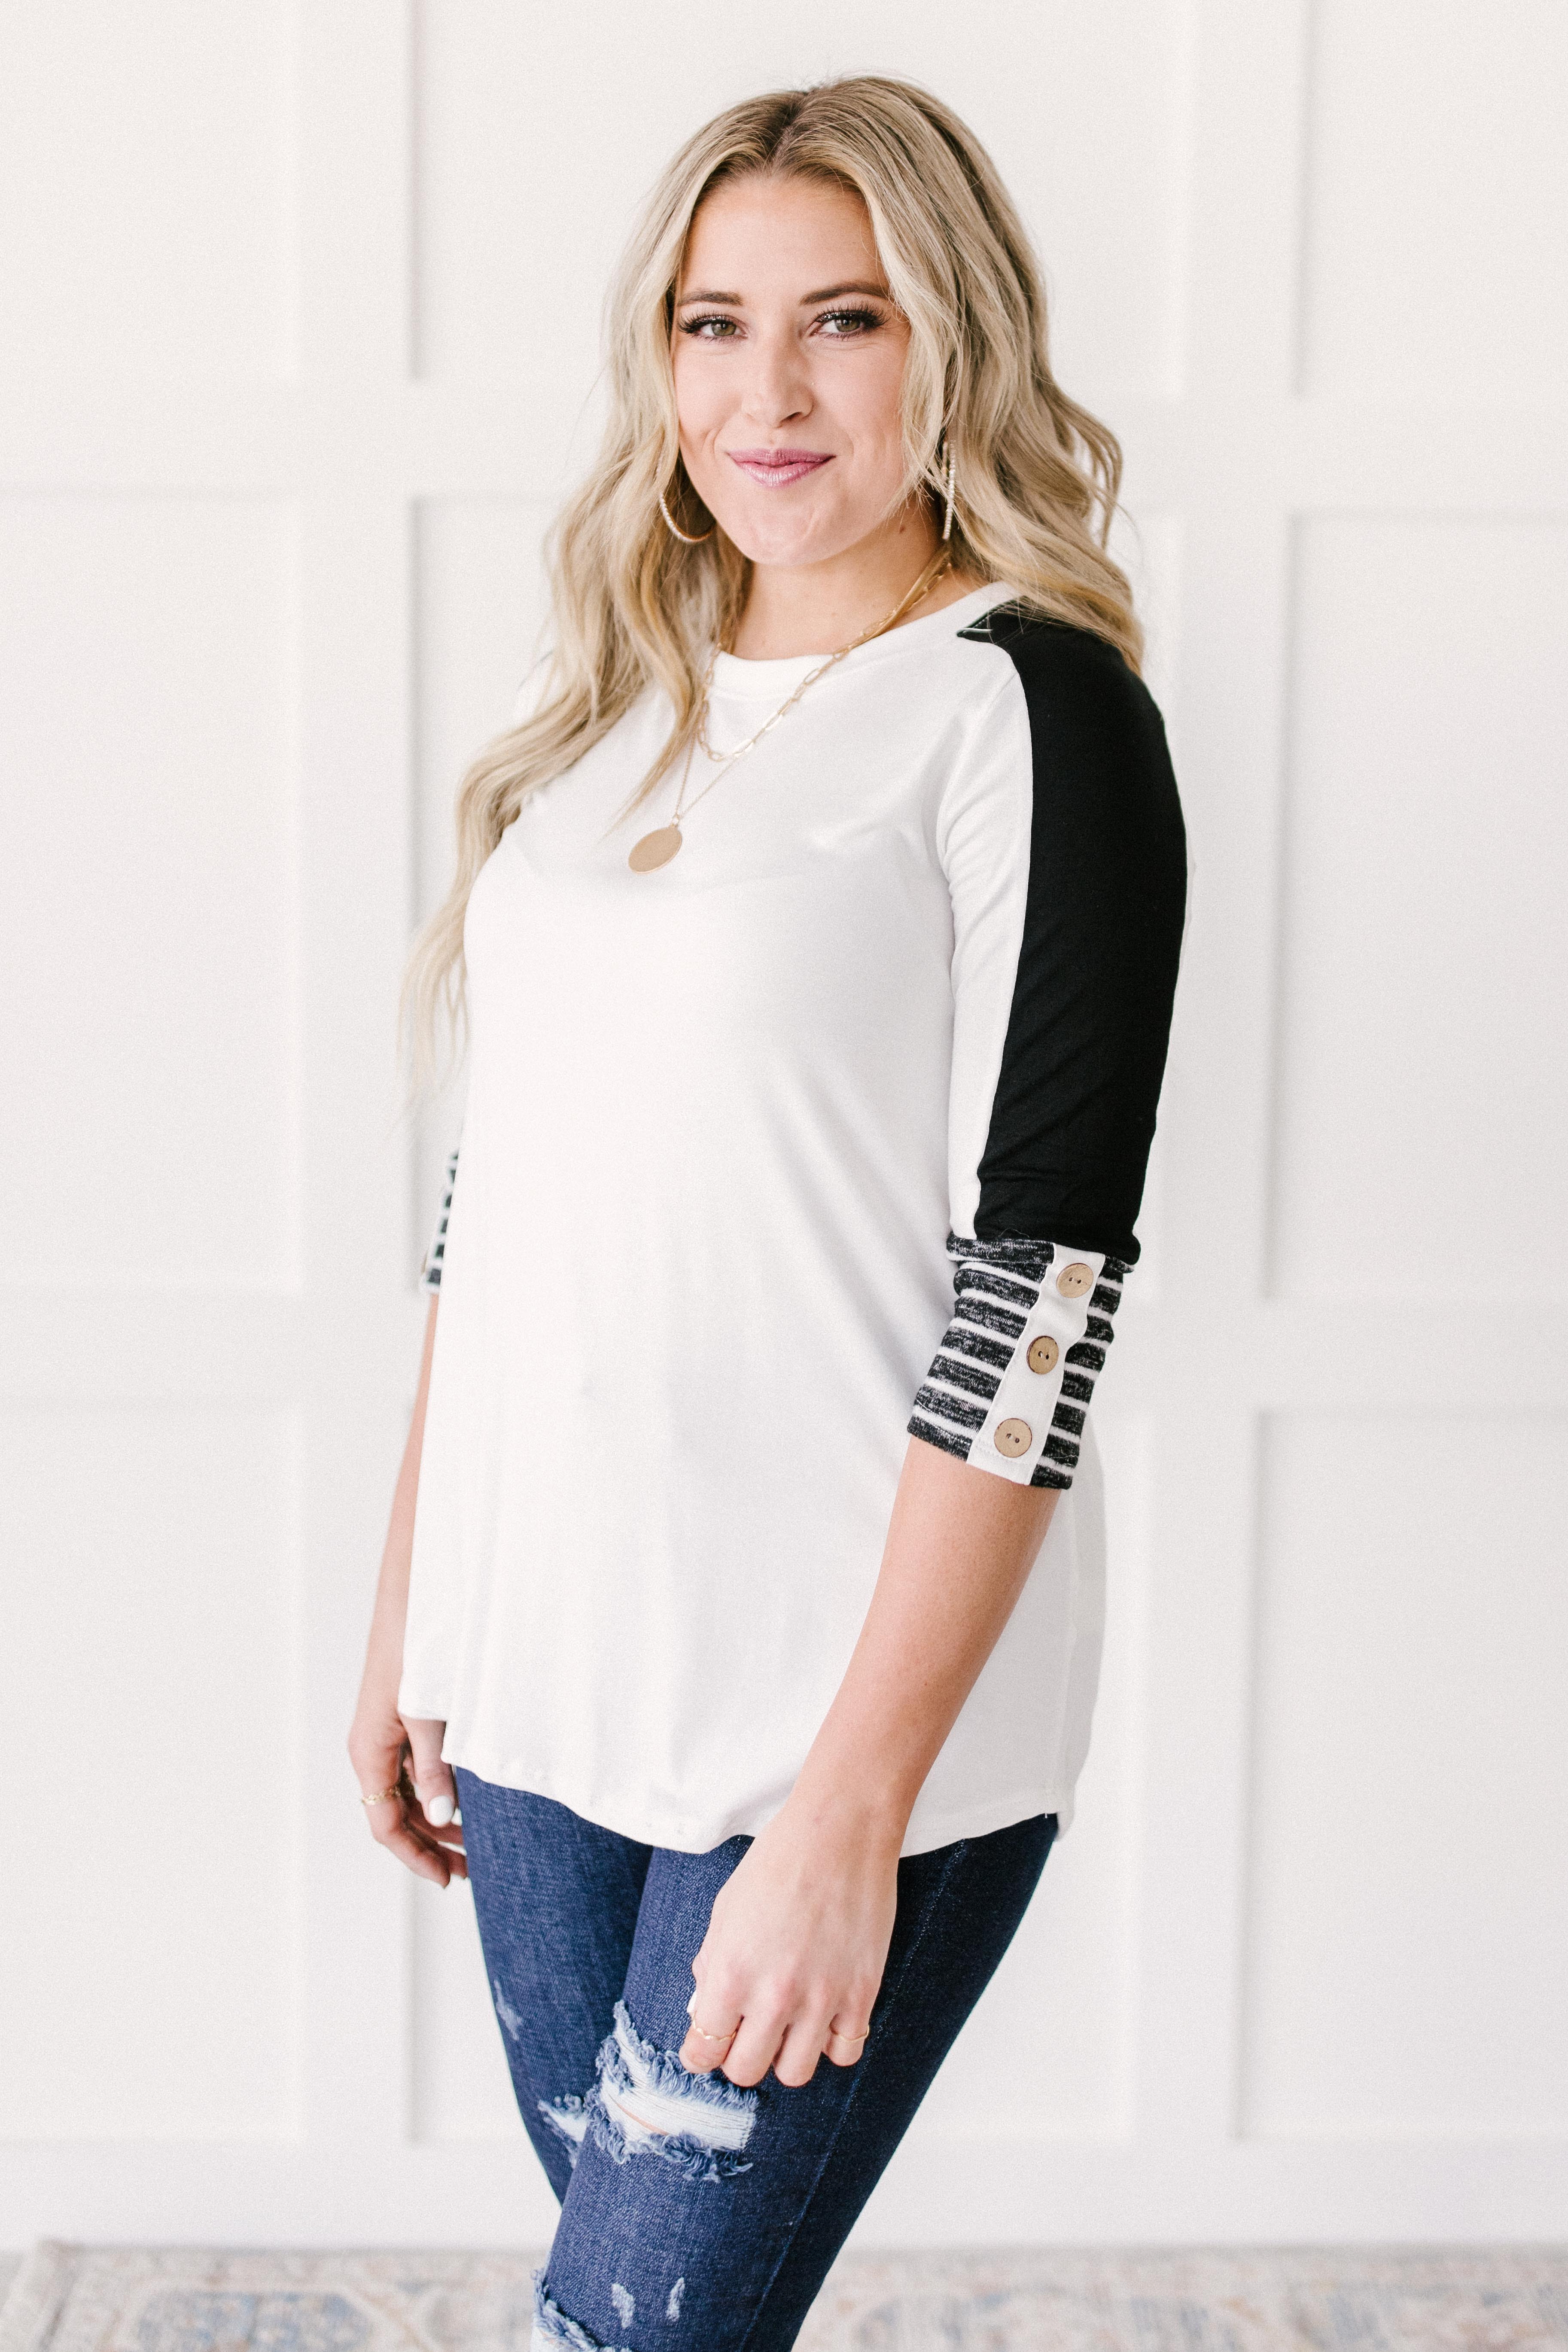 The Edge Of Stripes Top in White